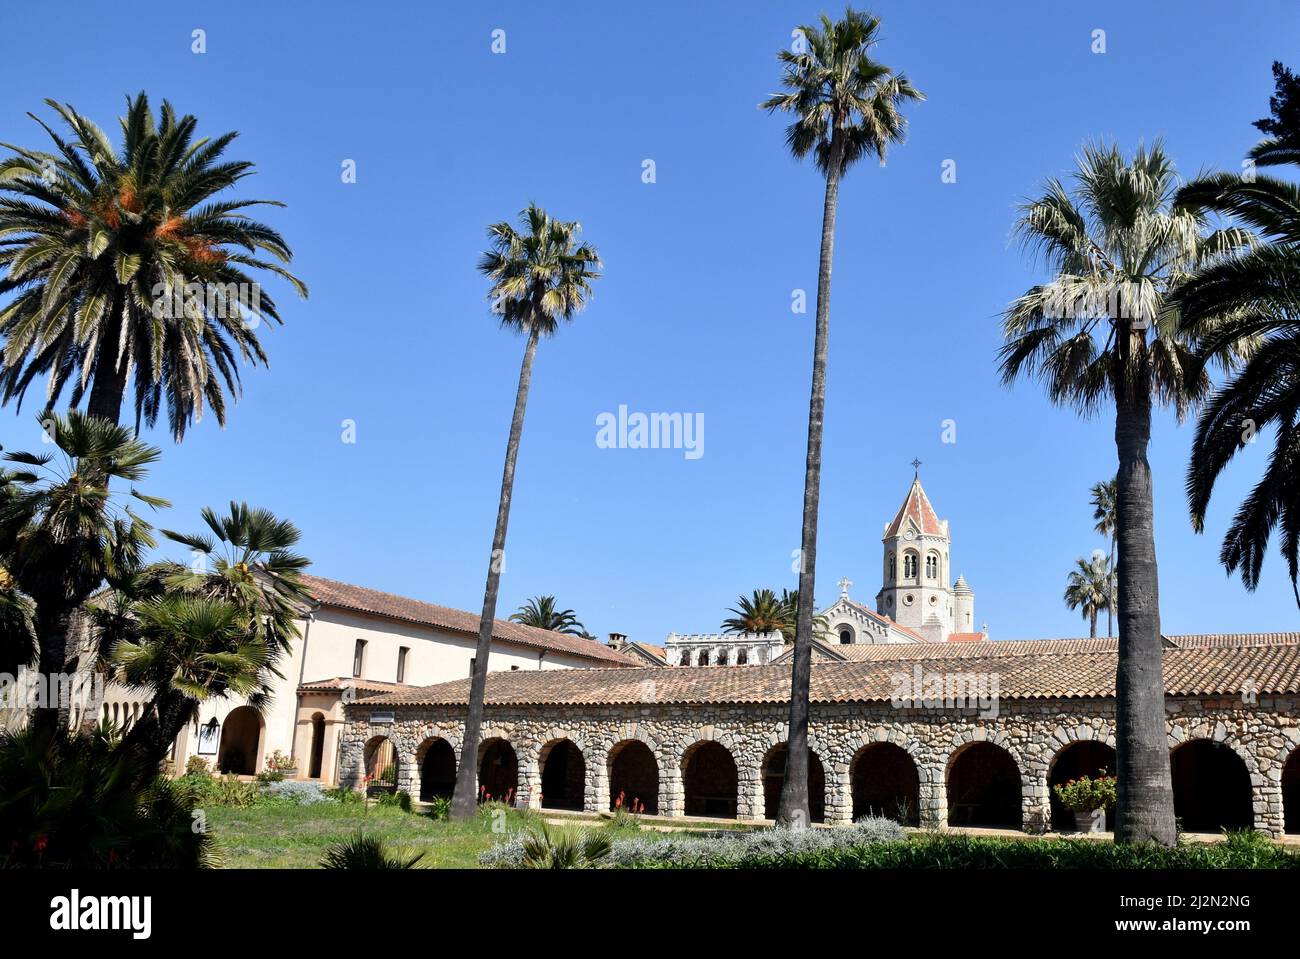 France, french riviera, Cannes, Abbaye de Lérins and its monastery located on the Saint Honorat island in the mediterranean sea. Stock Photo